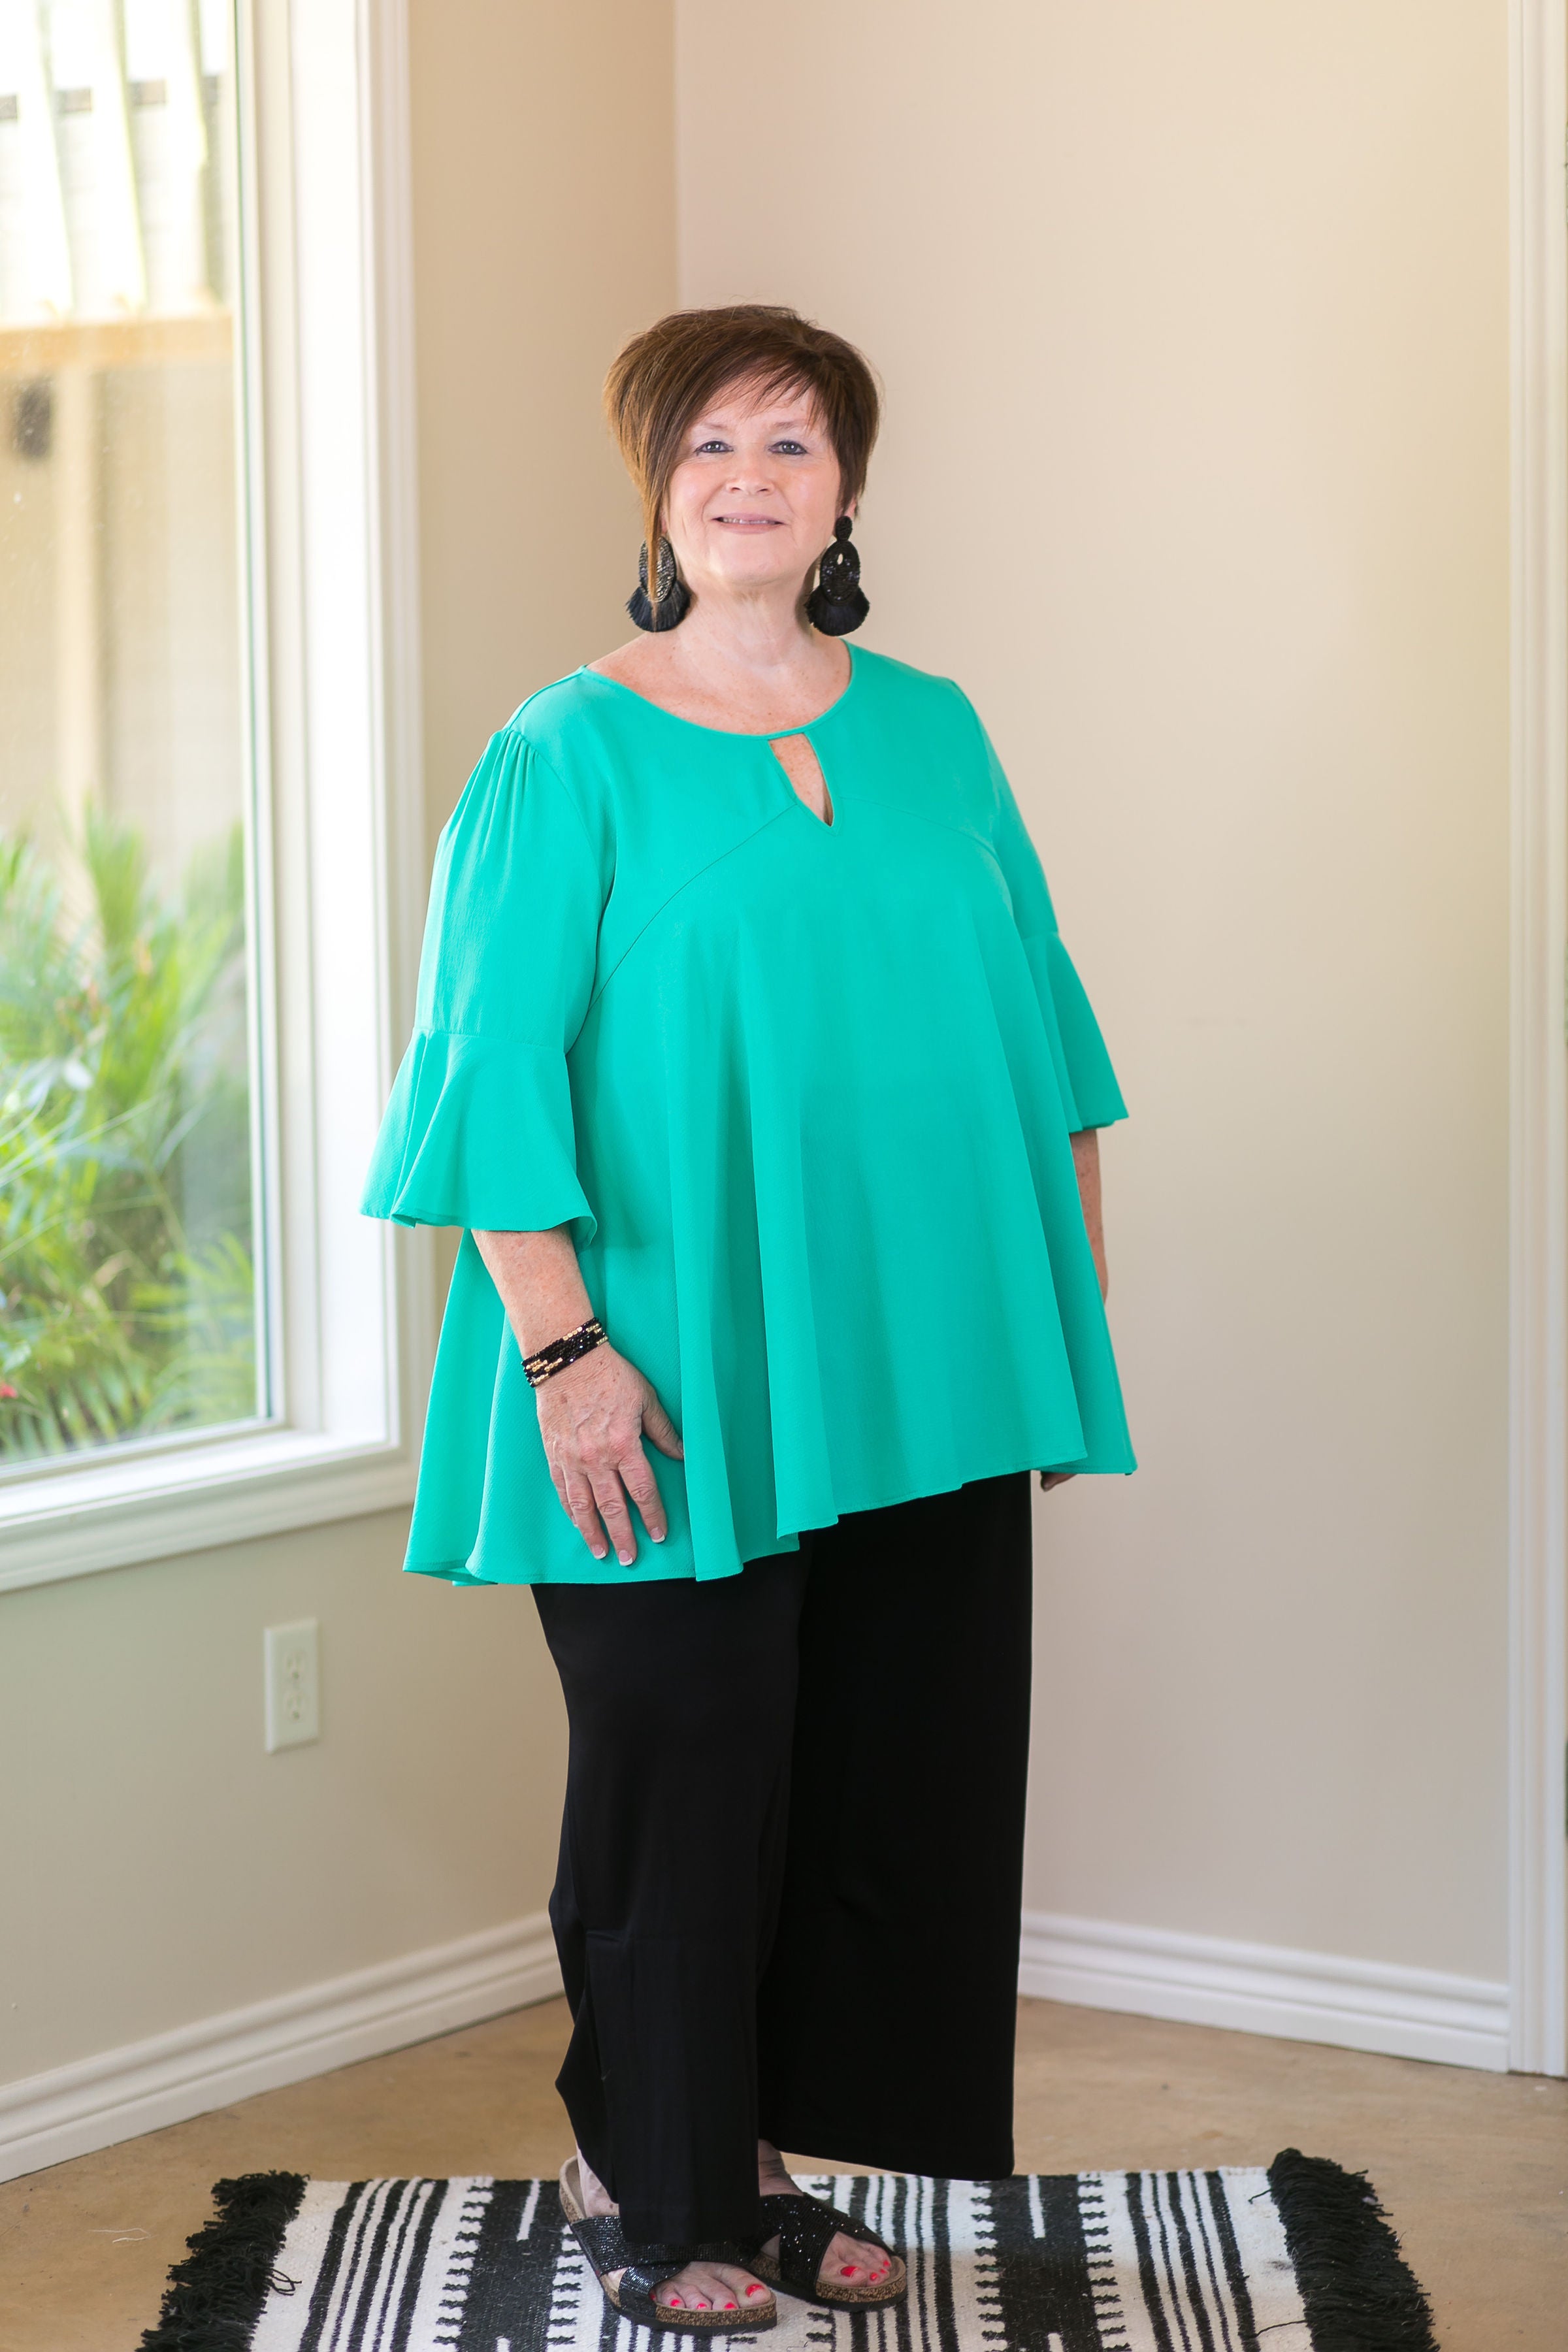 she and sky meet me in the middle plus size curvy girl fashions trendy boutique seafoam green turquoise jade